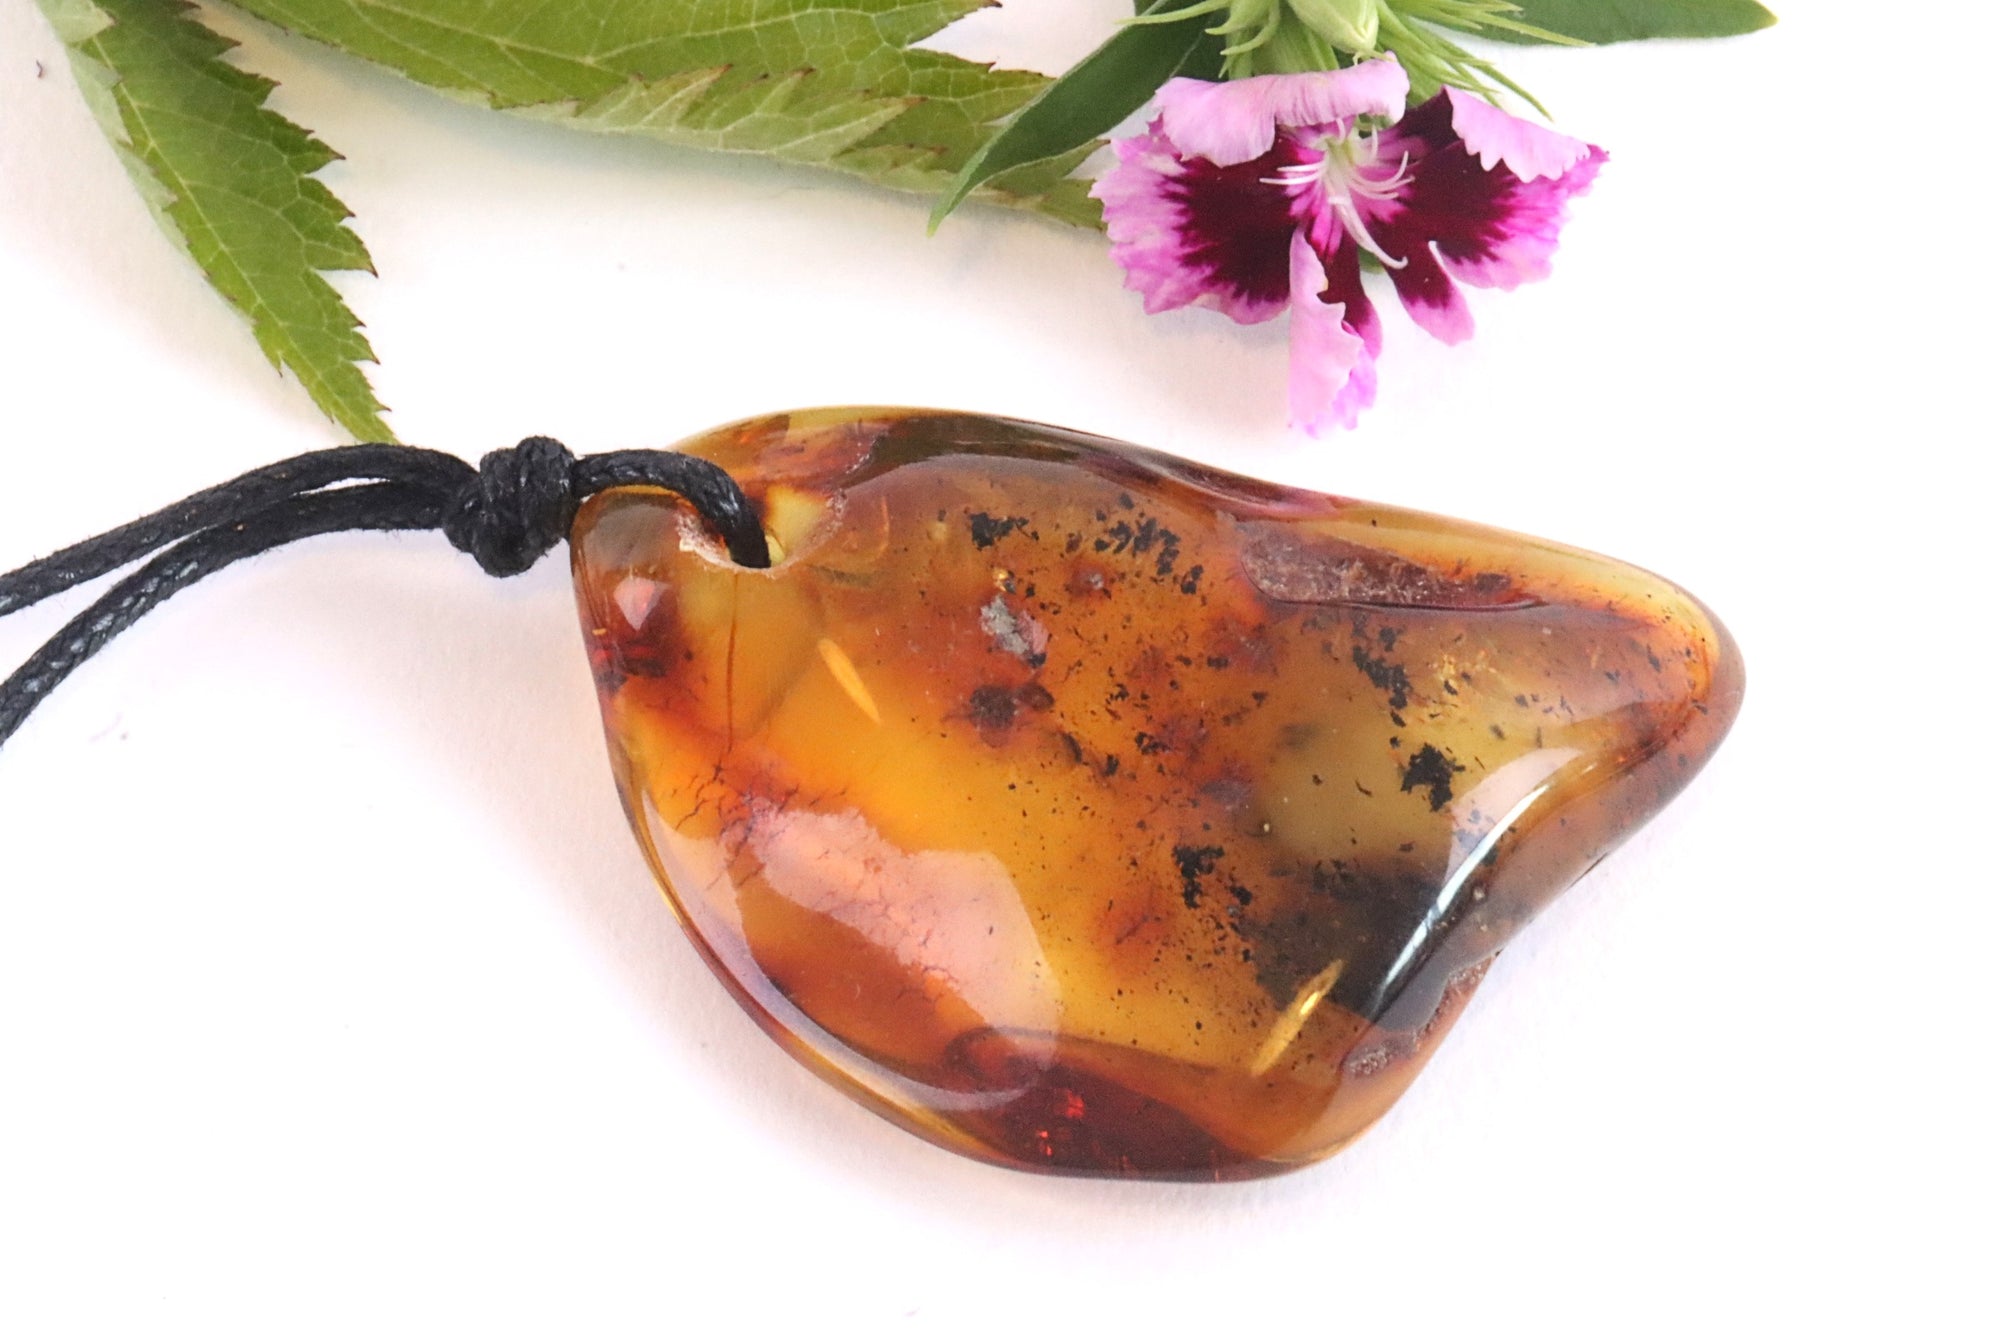 Natural Amber Amulet get One FREE